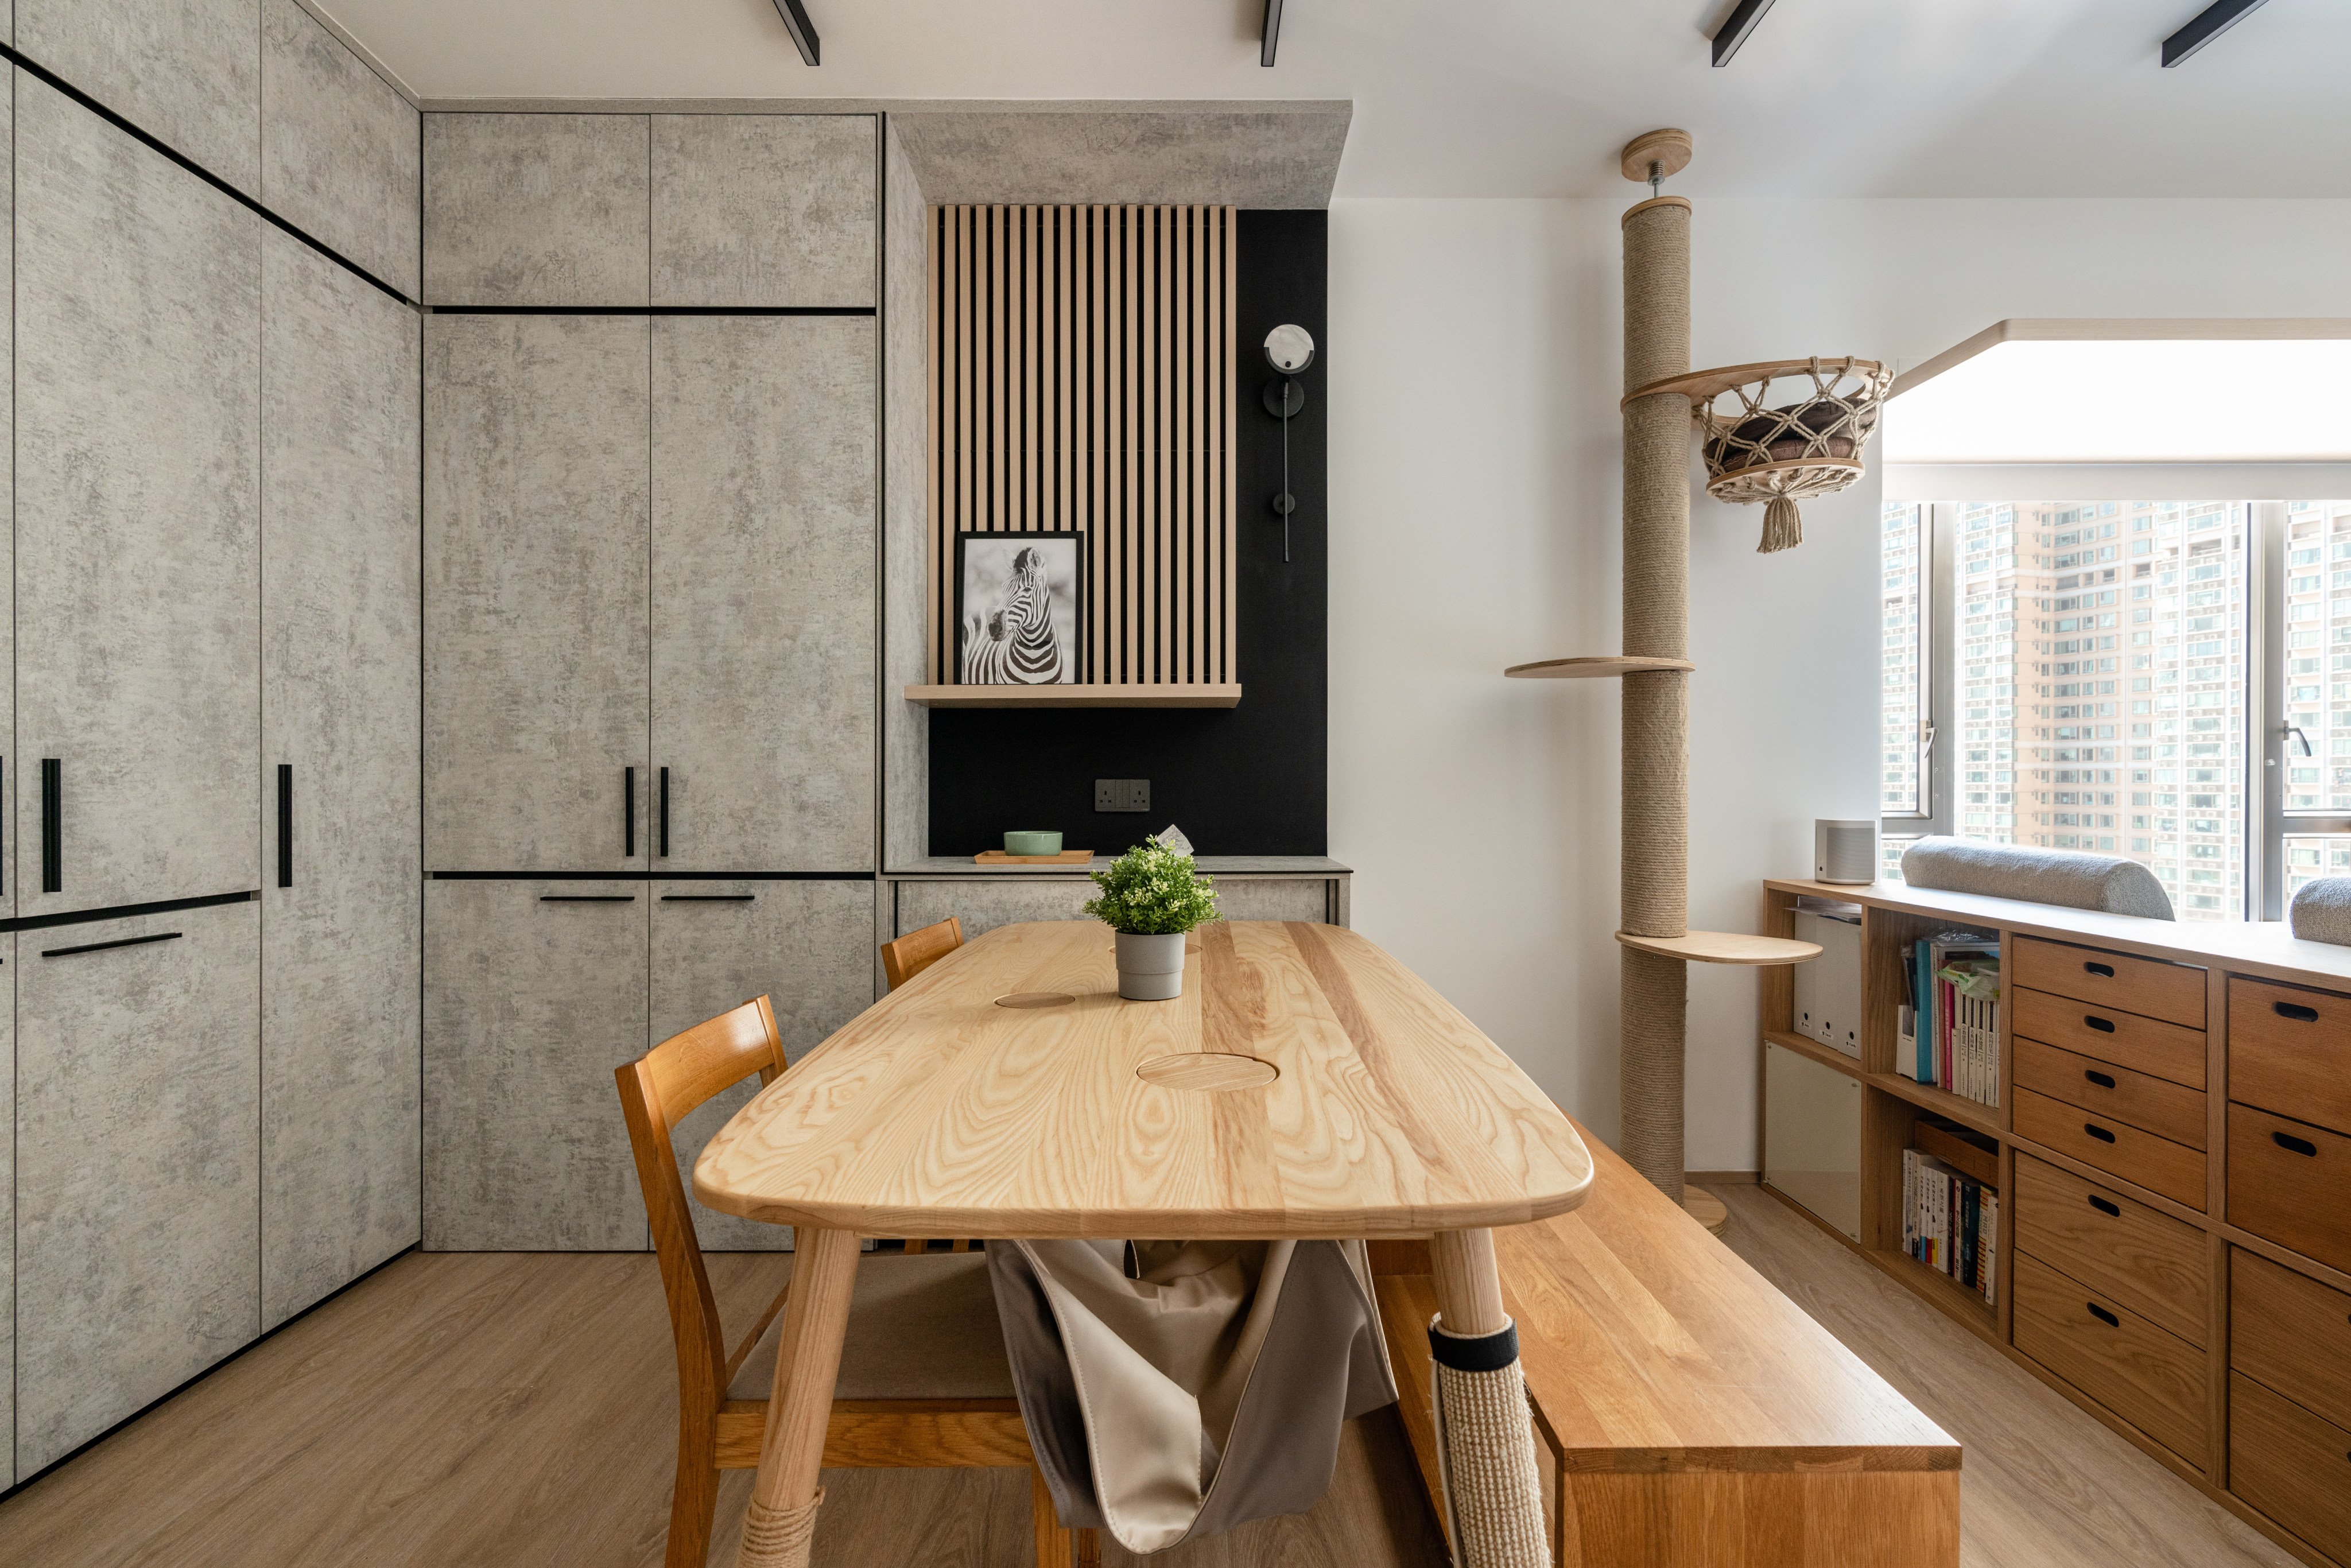 A Sham Tseng flat, in the New Territories in Hong Kong, was renovated with the owners’ cats in mind – think bespoke feline furniture, scratch-proof flooring paired with hidden storage and Japanese-style decor. Photo: Tracy Wong